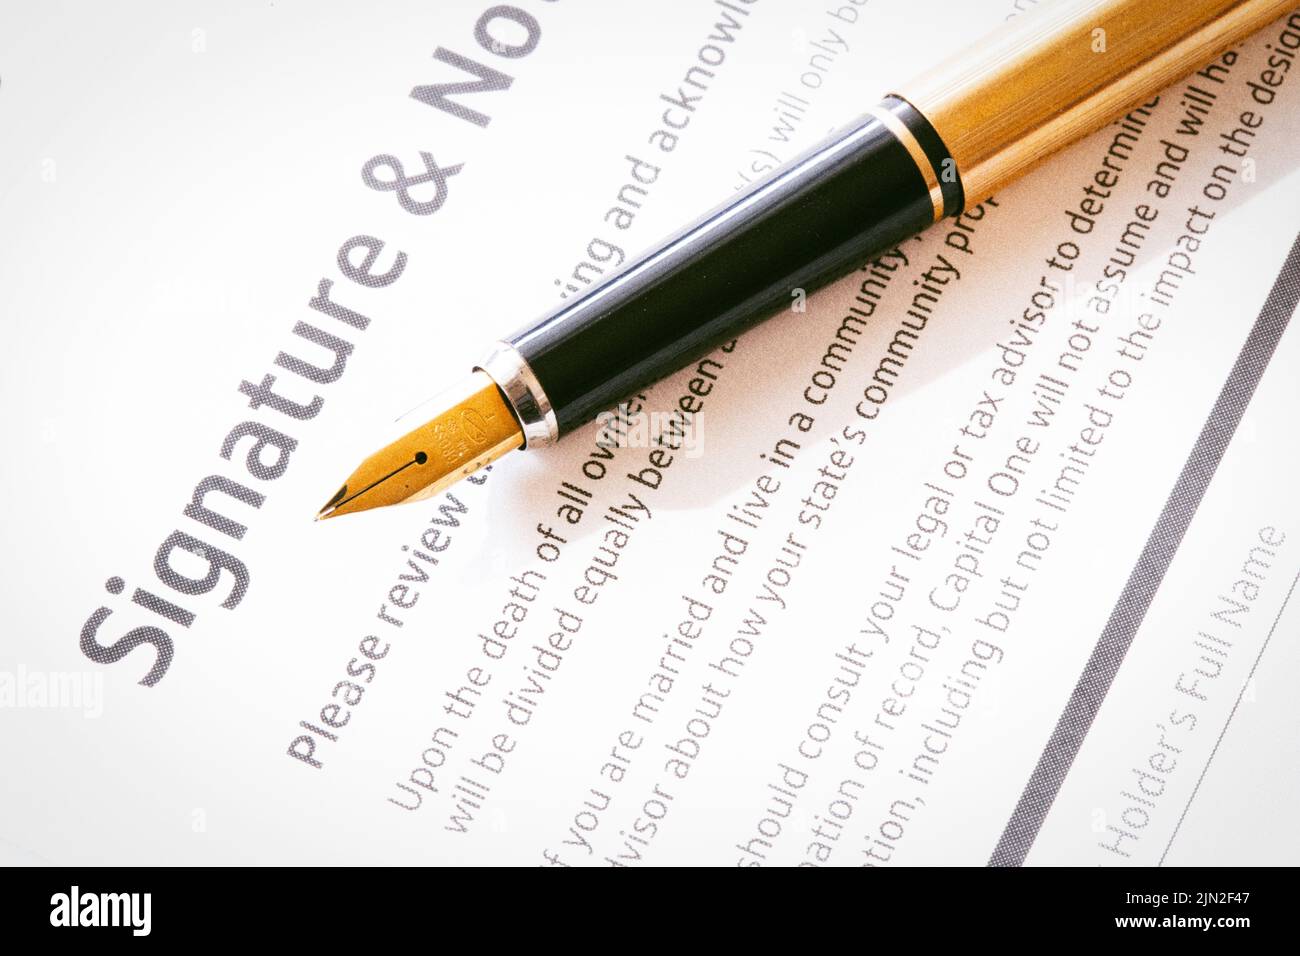 Close up of a vintage fountain pen on a legal document, United States Stock Photo